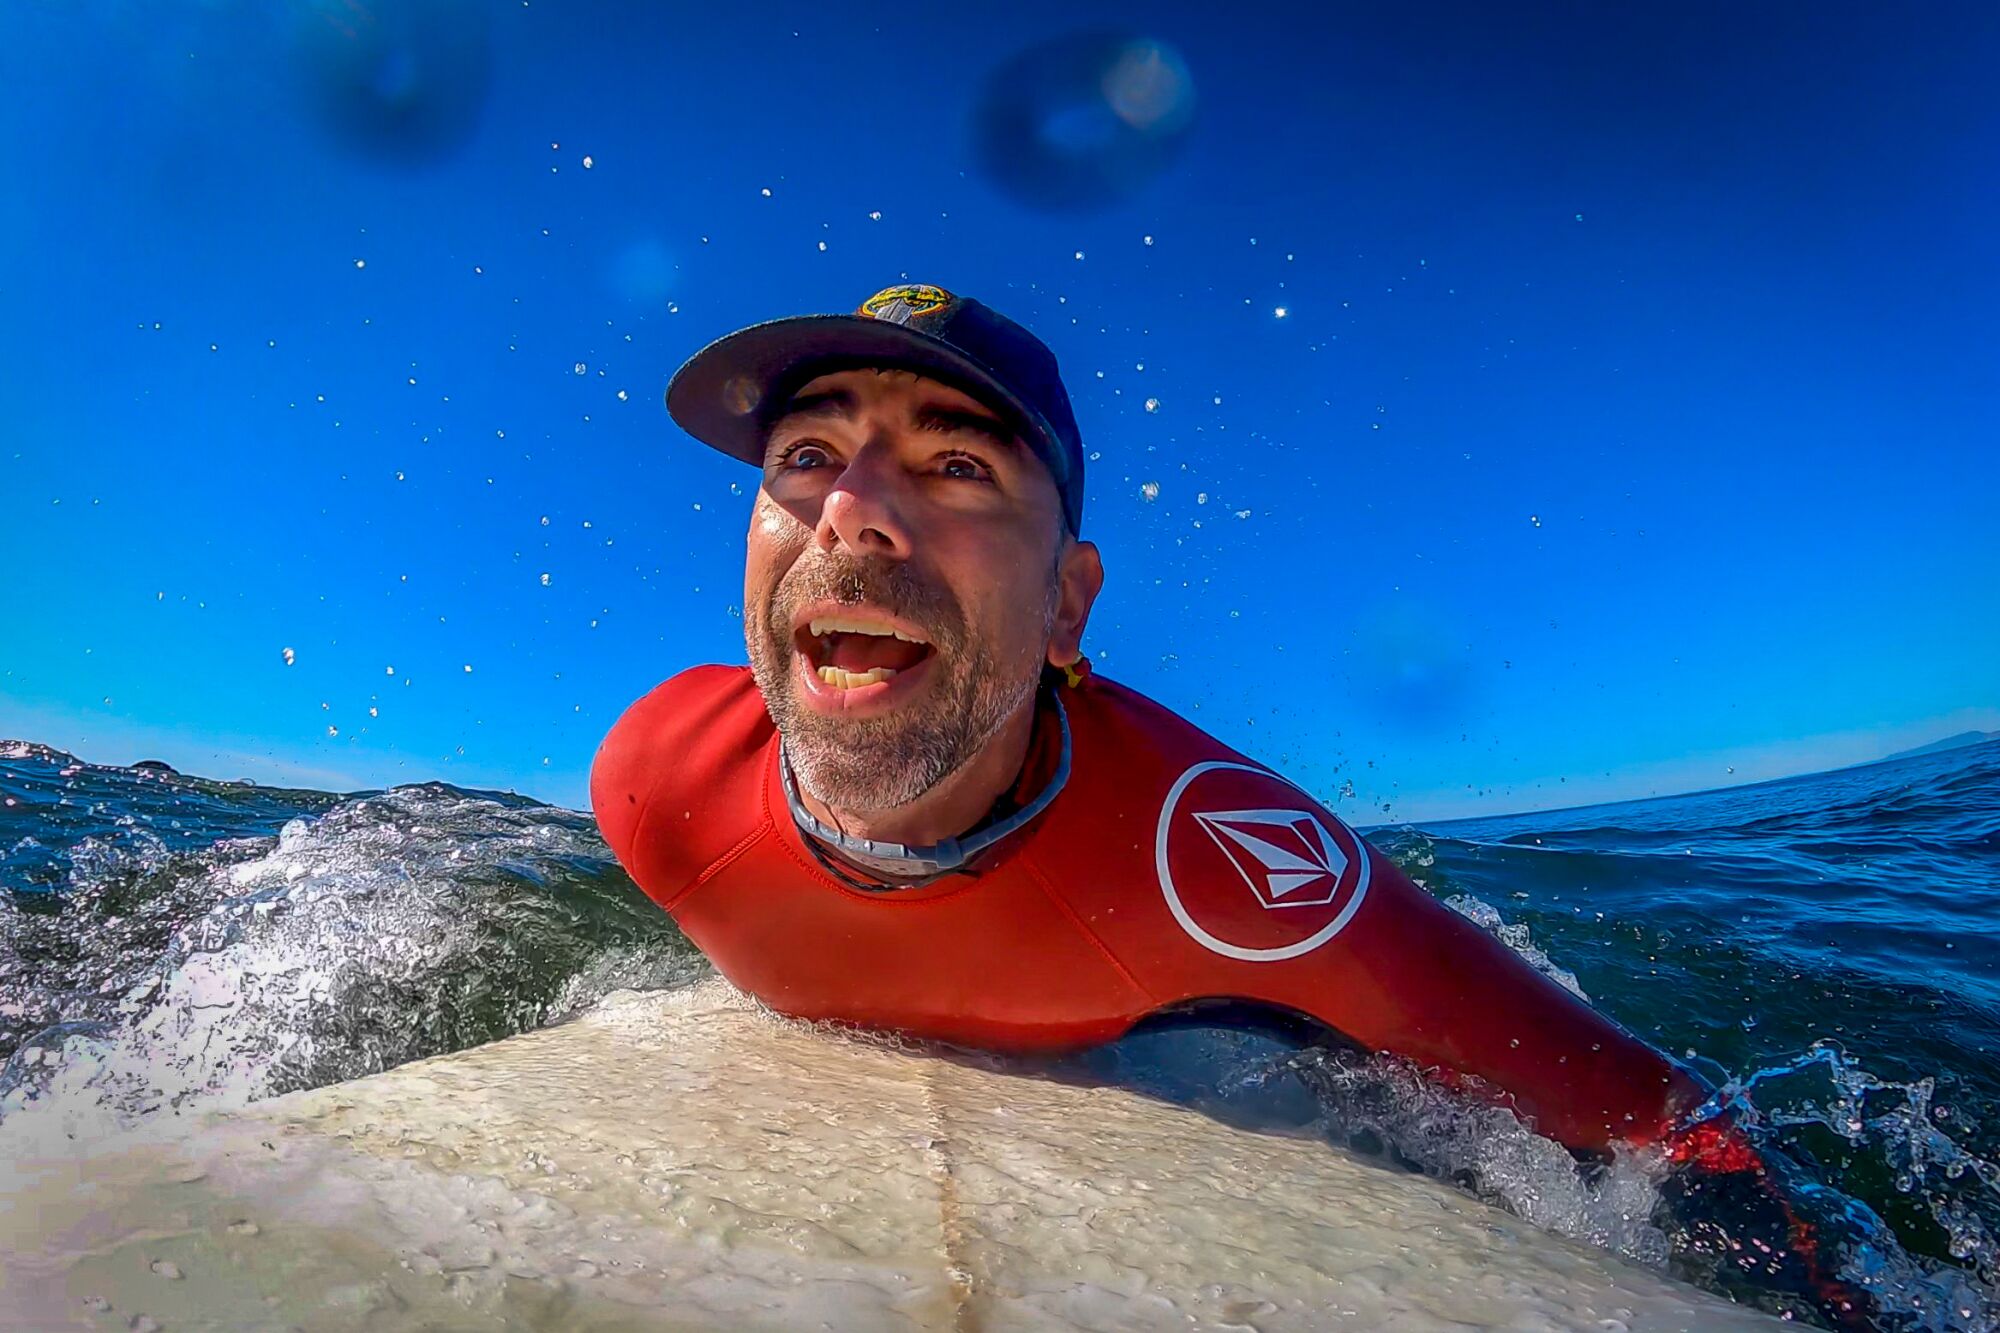 A man in a hat and red wetsuit grins as he paddles his surfboard in the ocean.